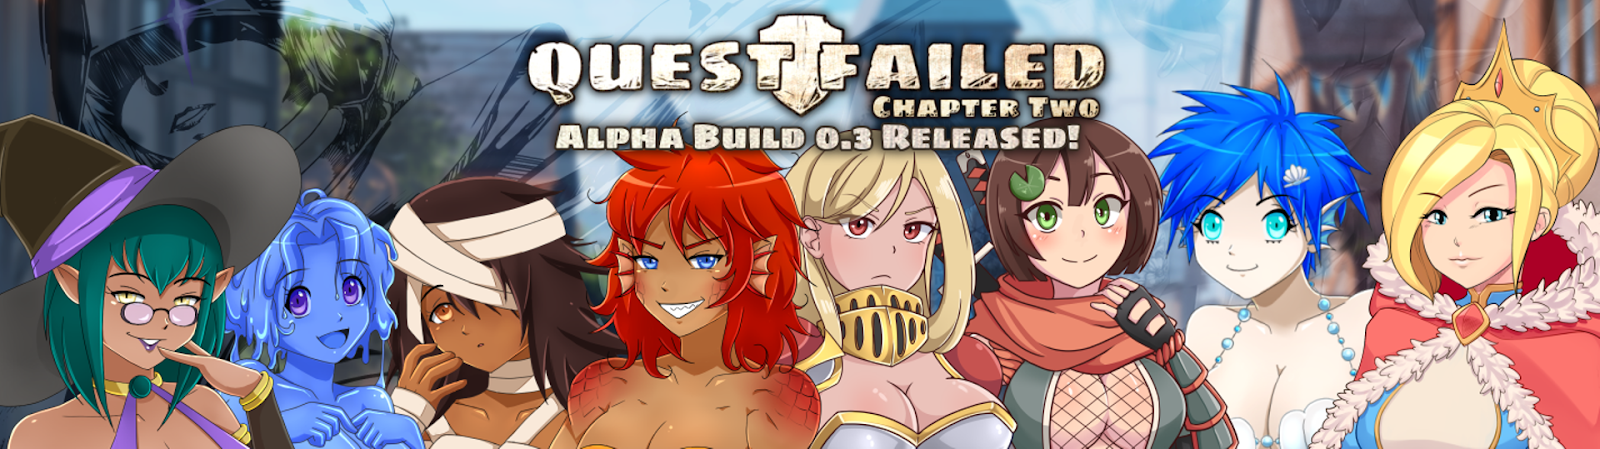 Quest Failed Chapter 1 Download